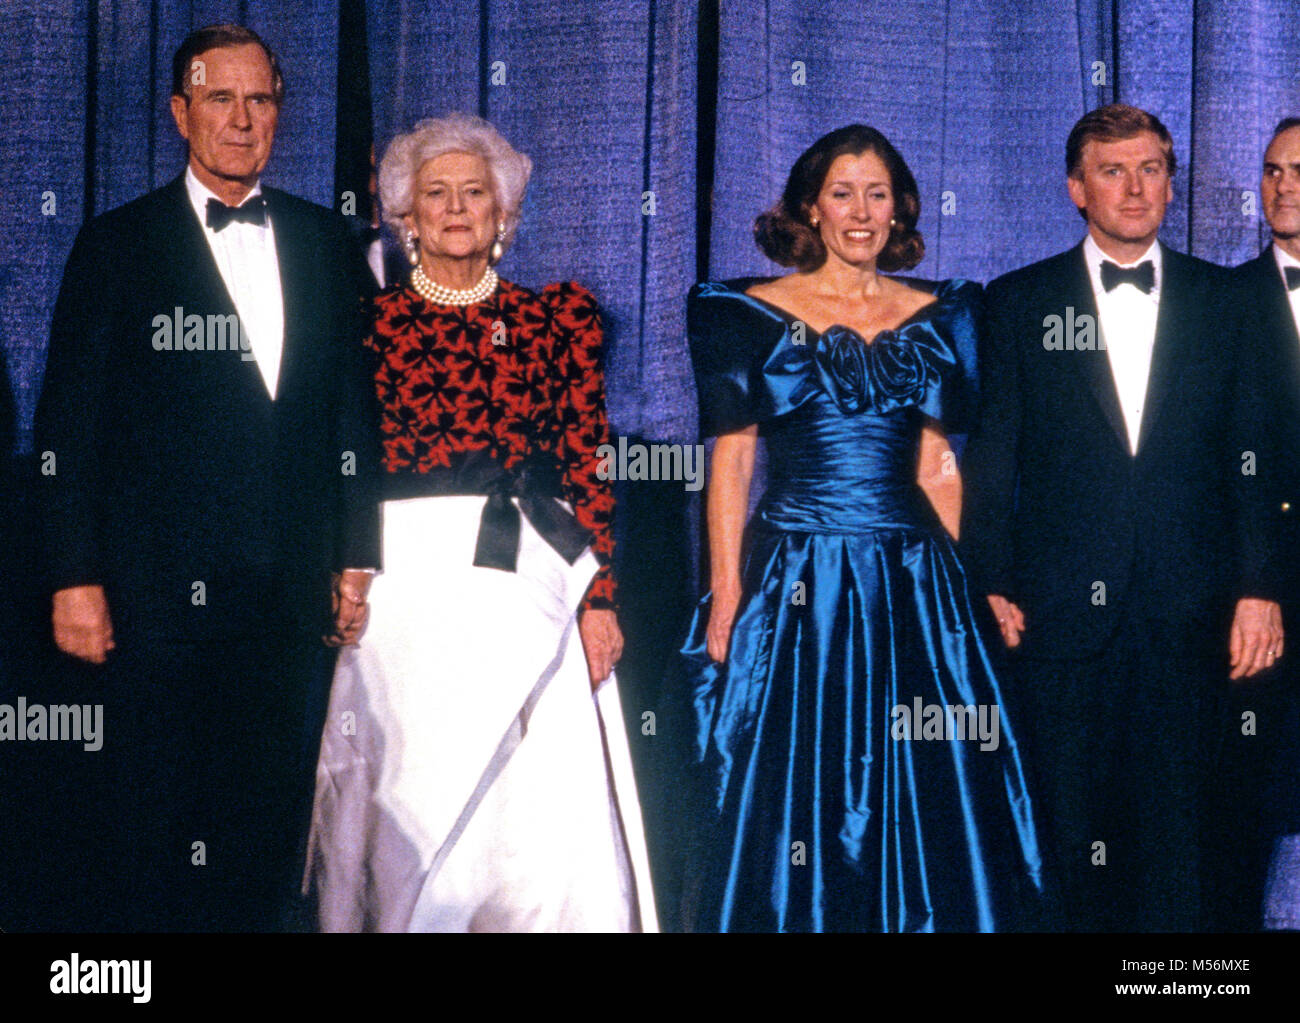 From left to right: United States President-elect George H.W. Bush, Barbara Bush, Marilyn Quayle, and US Vice President-elect Dan Quayle, attends the Inaugural Gala at the Washington DC Convention Center in Washington, DC on January 18 1989.    Credit: David Burnett / Pool via CNP /MediaPunch Stock Photo